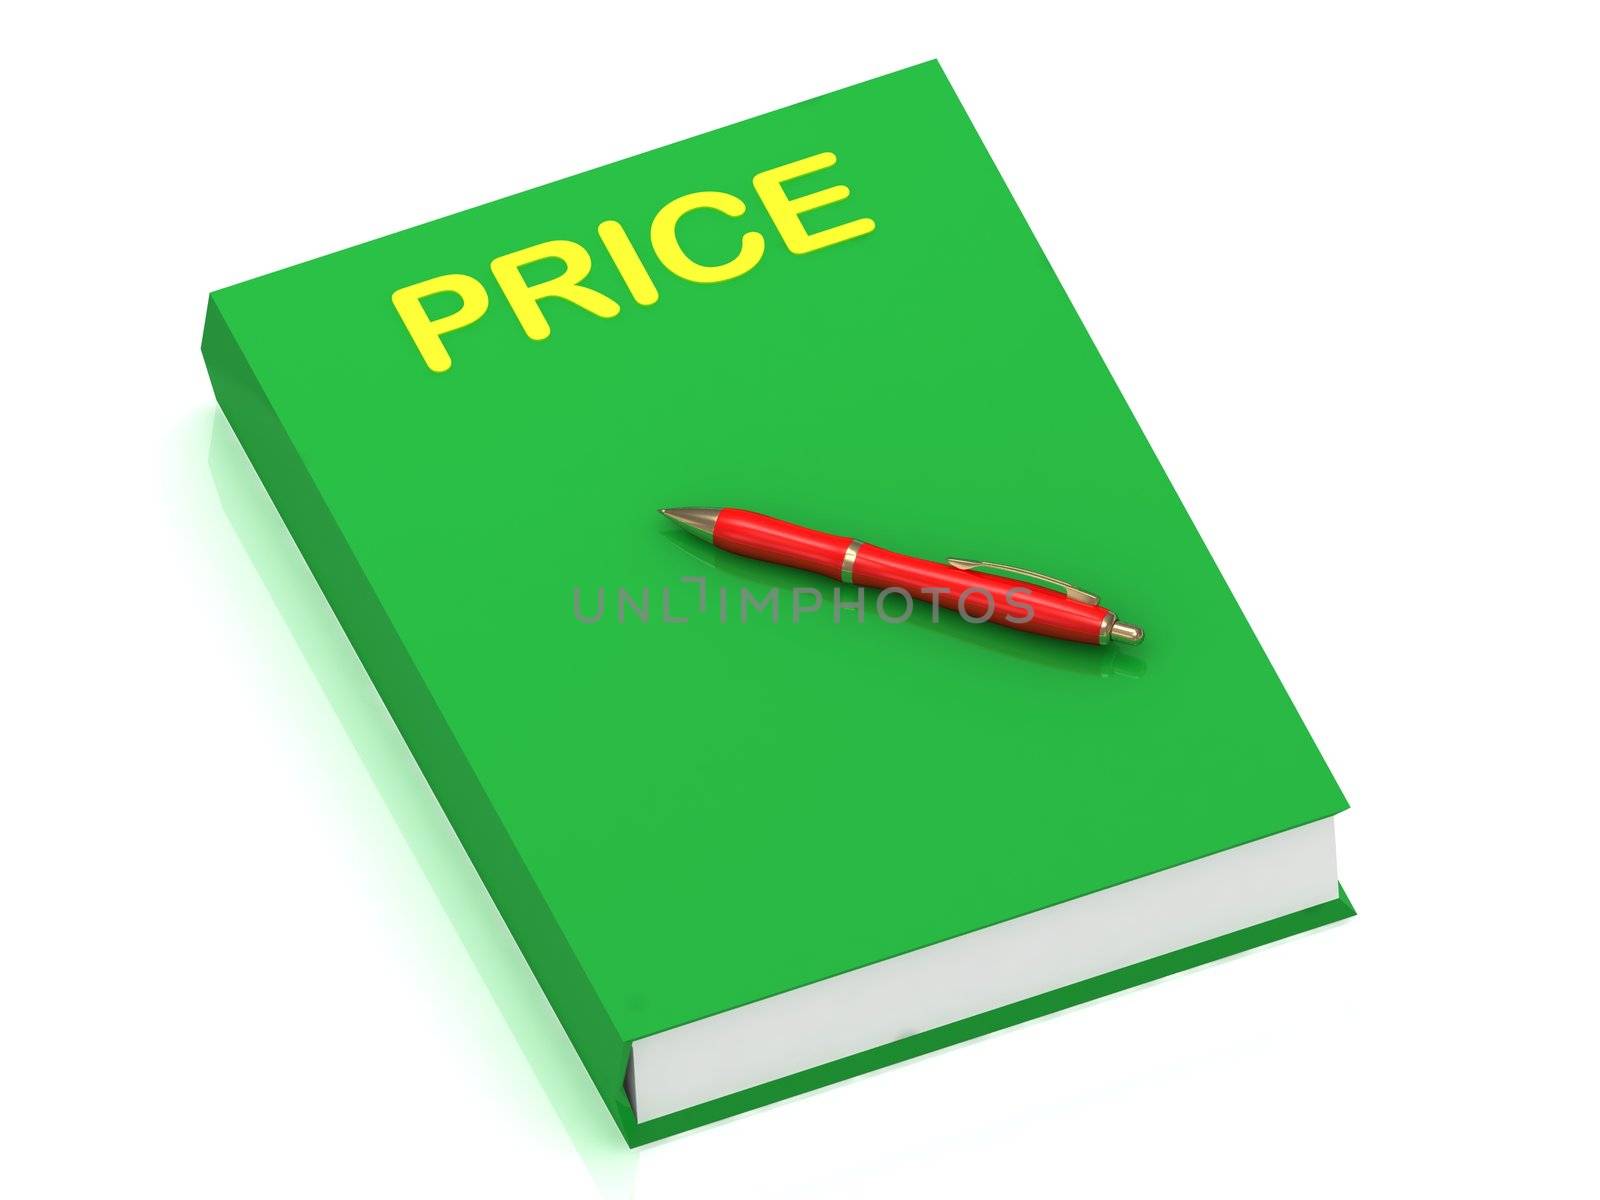 PRICE inscription on cover book and red pen on the book. 3D illustration isolated on white background